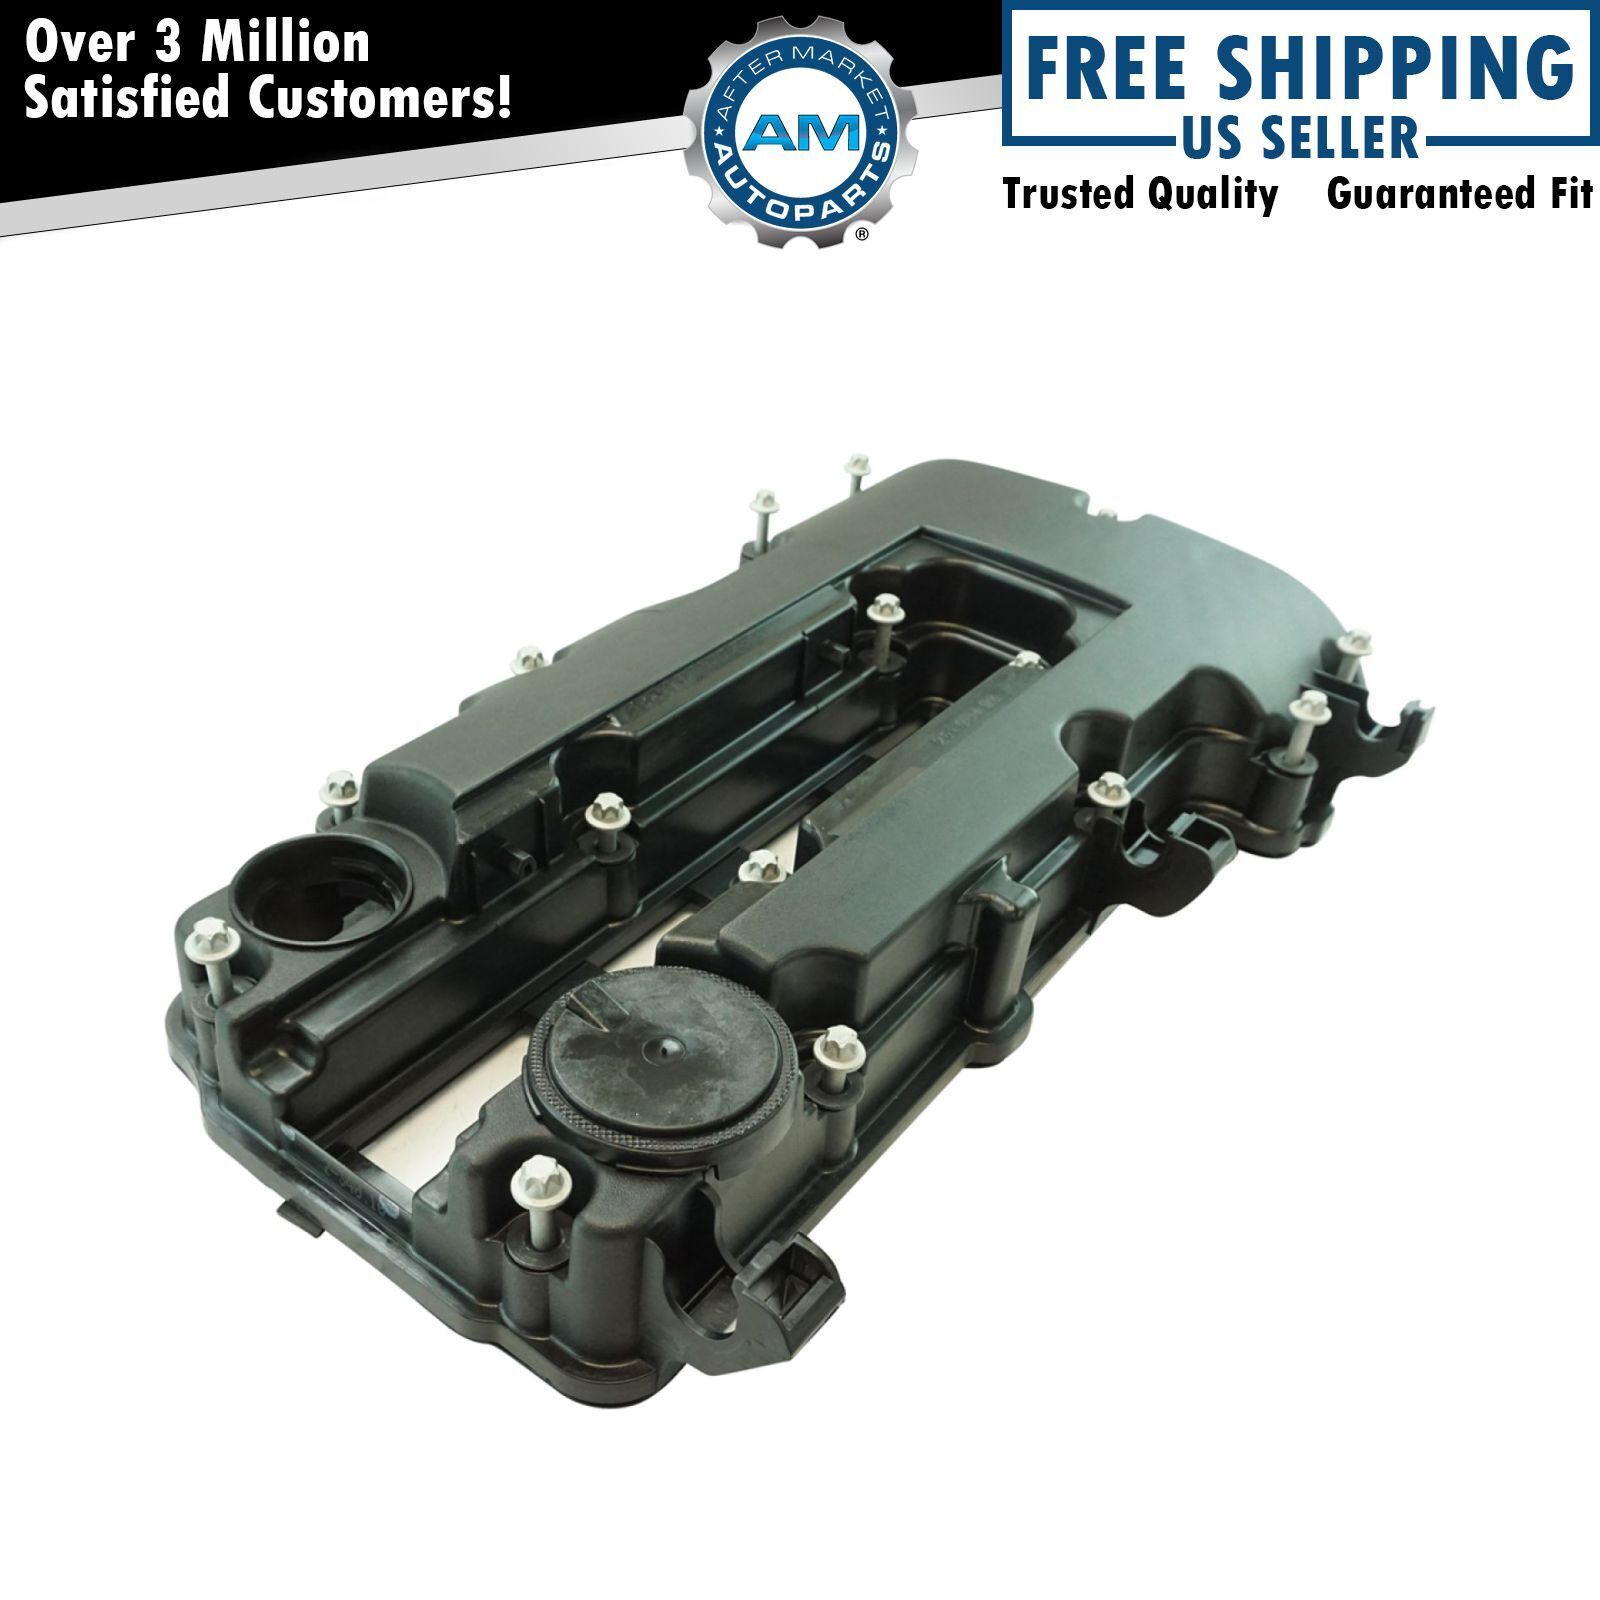 OEM Camshaft Valve Cover w/ Bolts & Seal for Chevy Cruze Sonic Volt Trax 1.4L